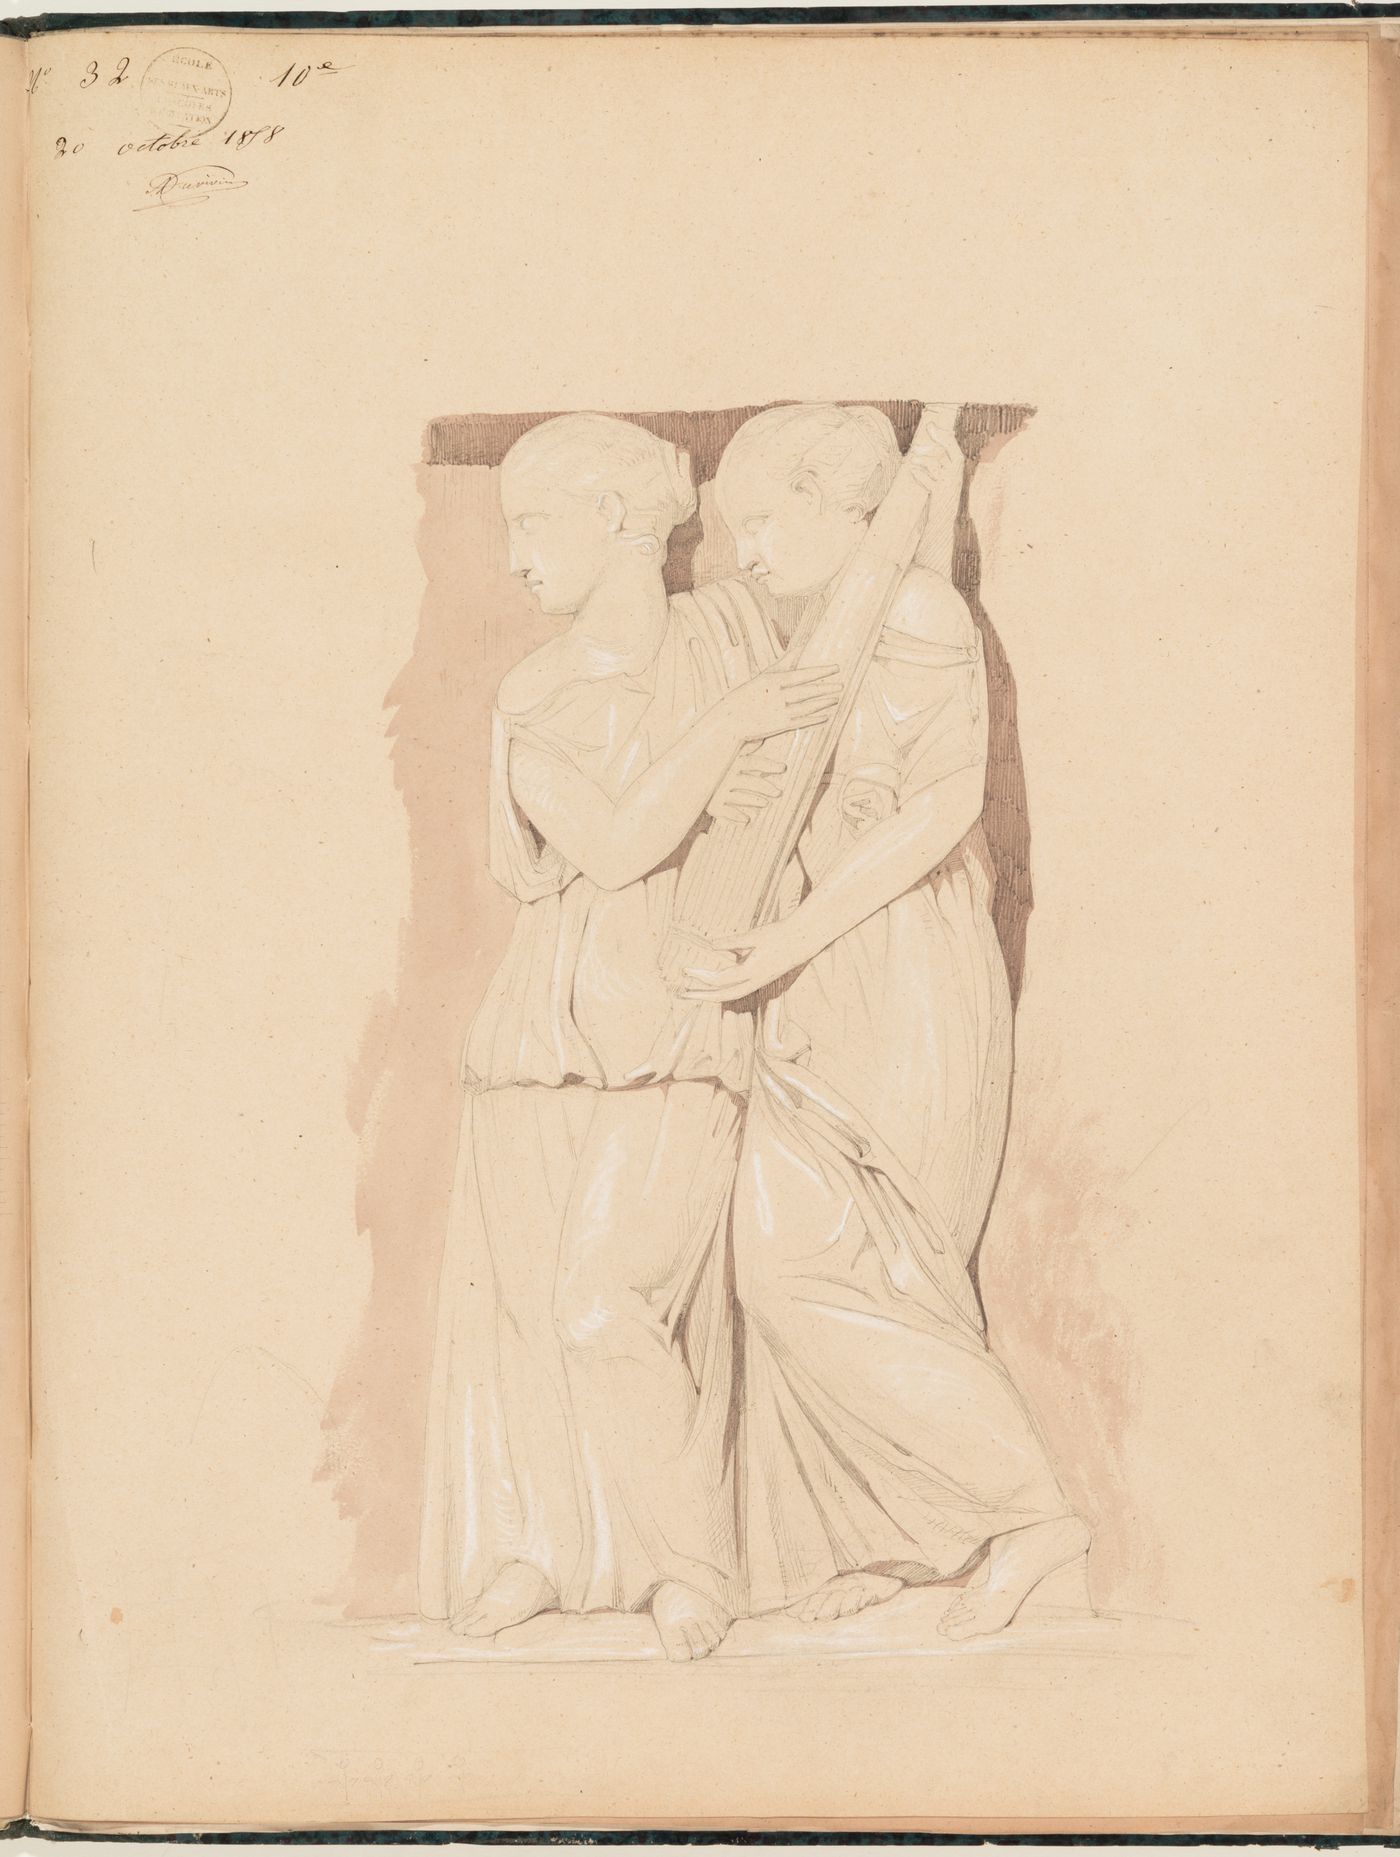 Concours d'émulation entry, 20 October 1858: Study of two female figures, probably from a metope